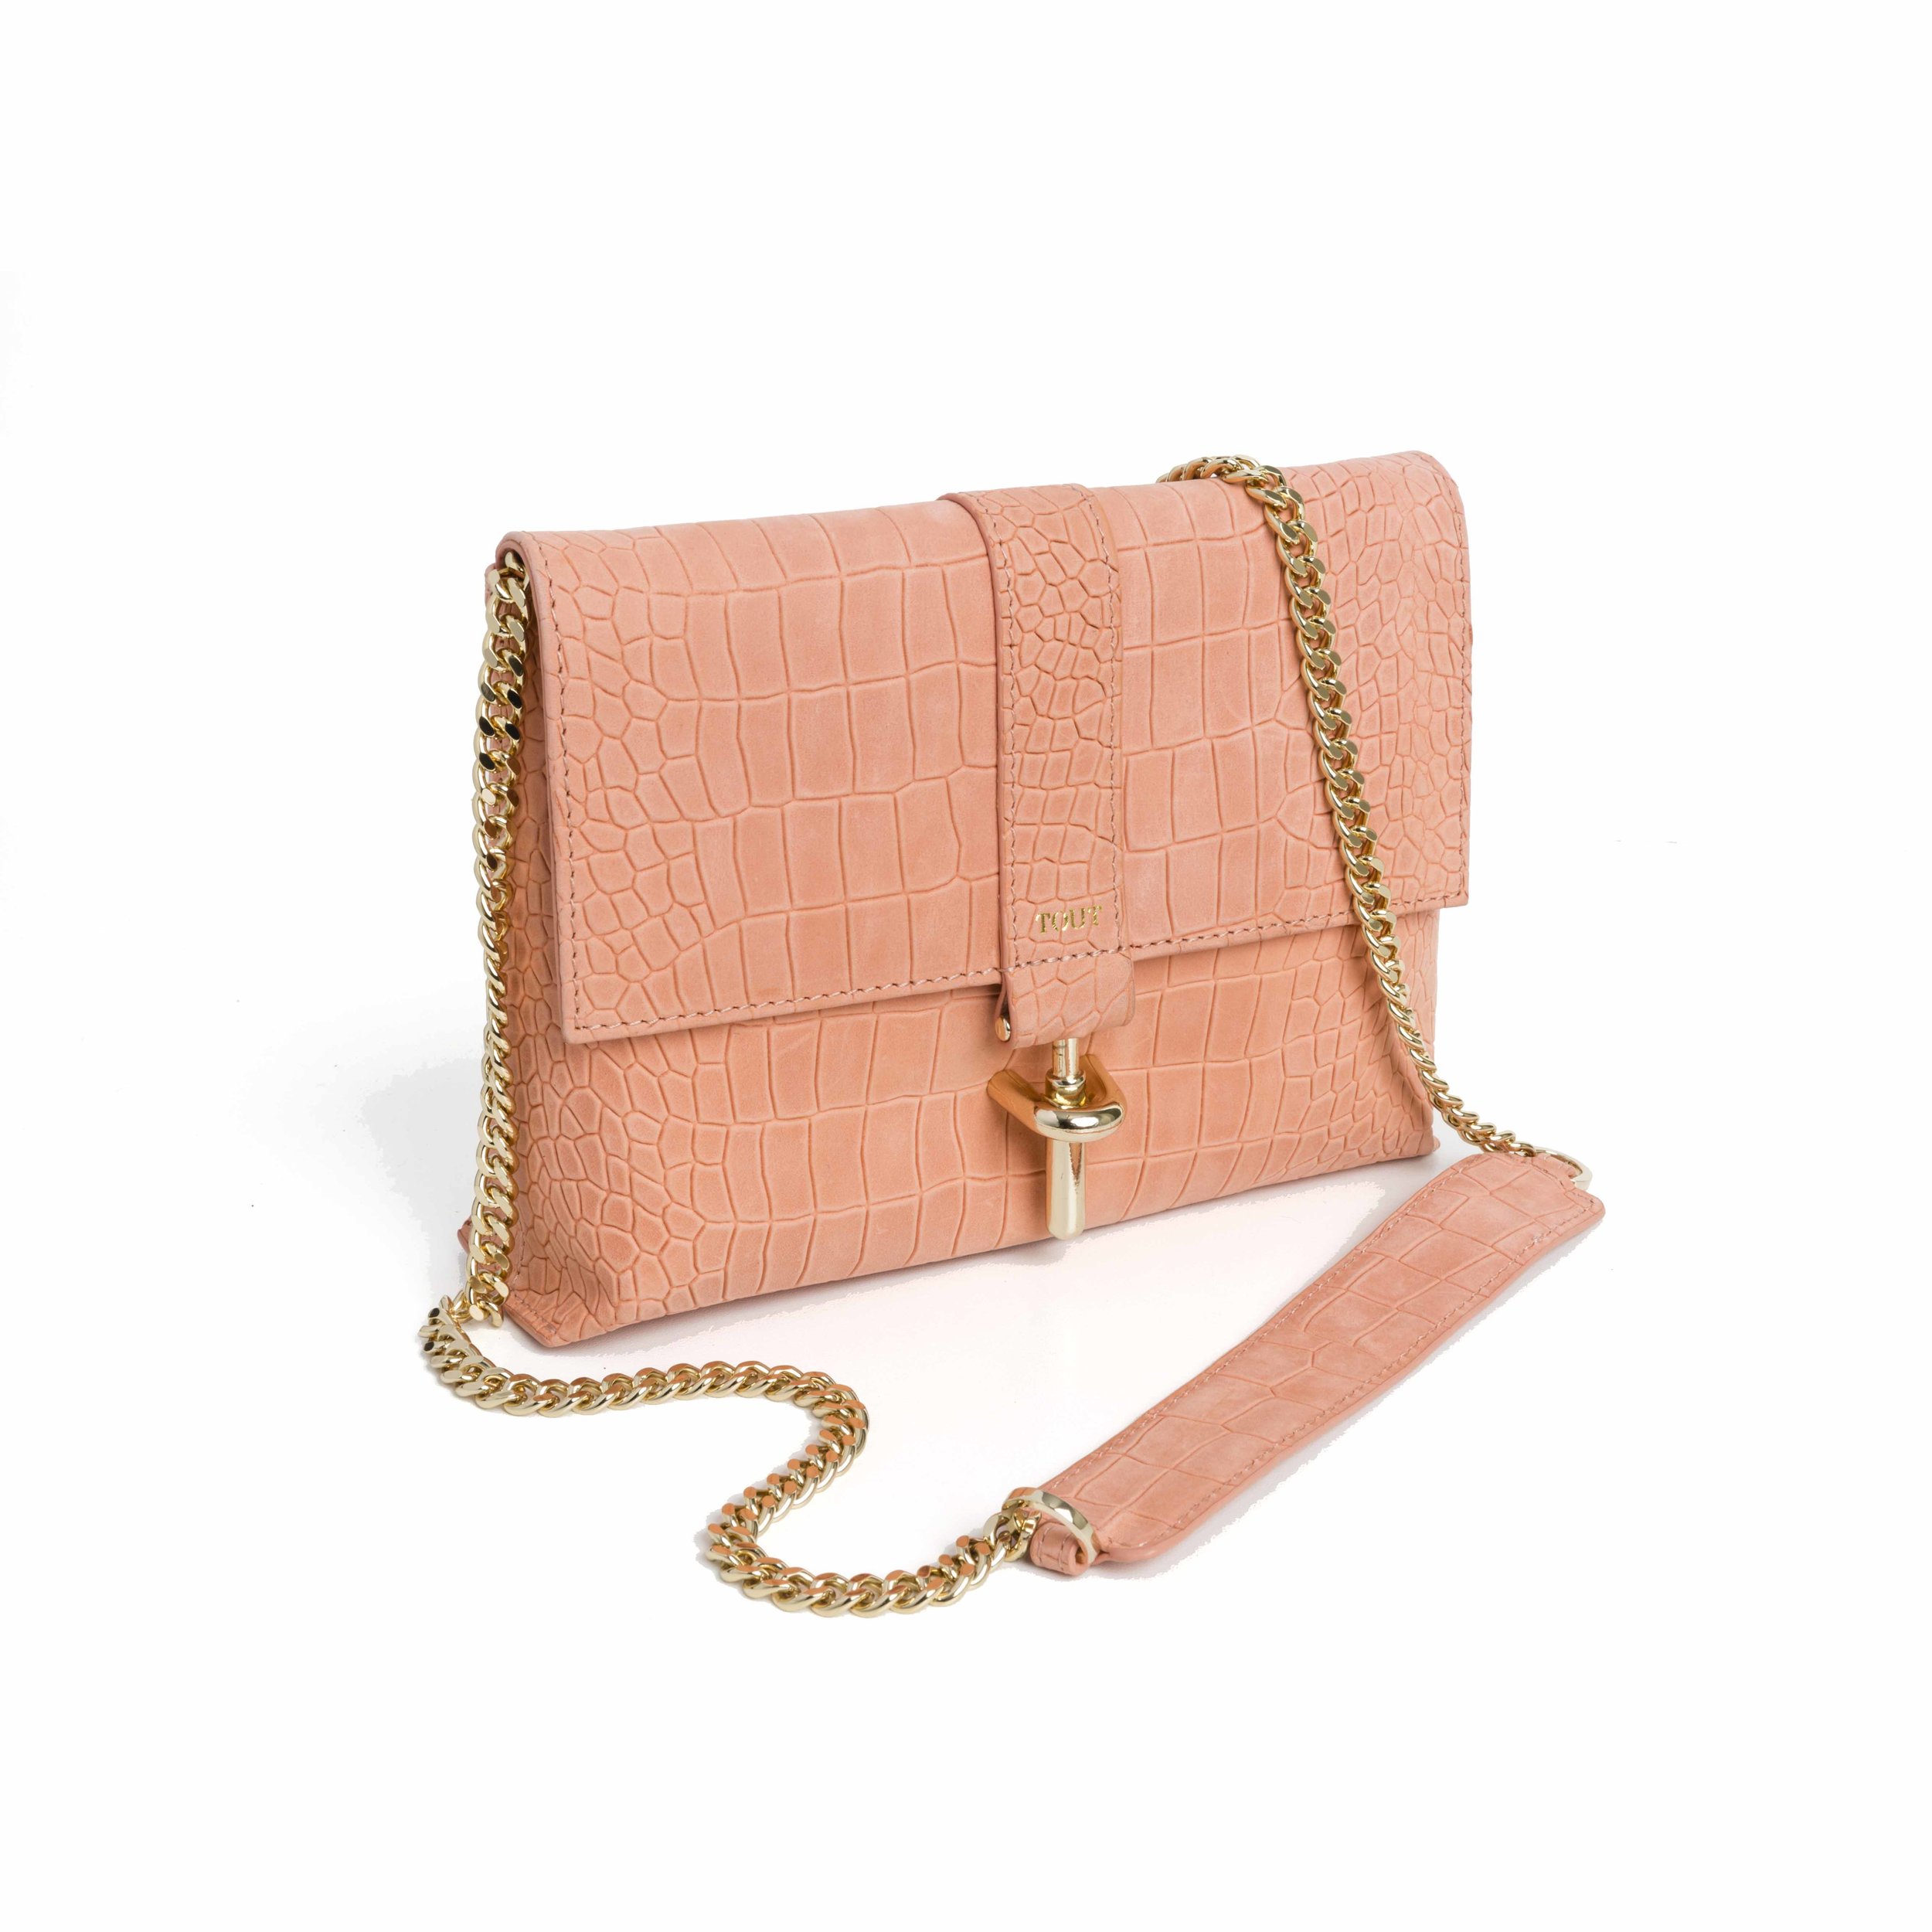 Bags and Accessories Store | TOUT Handbags